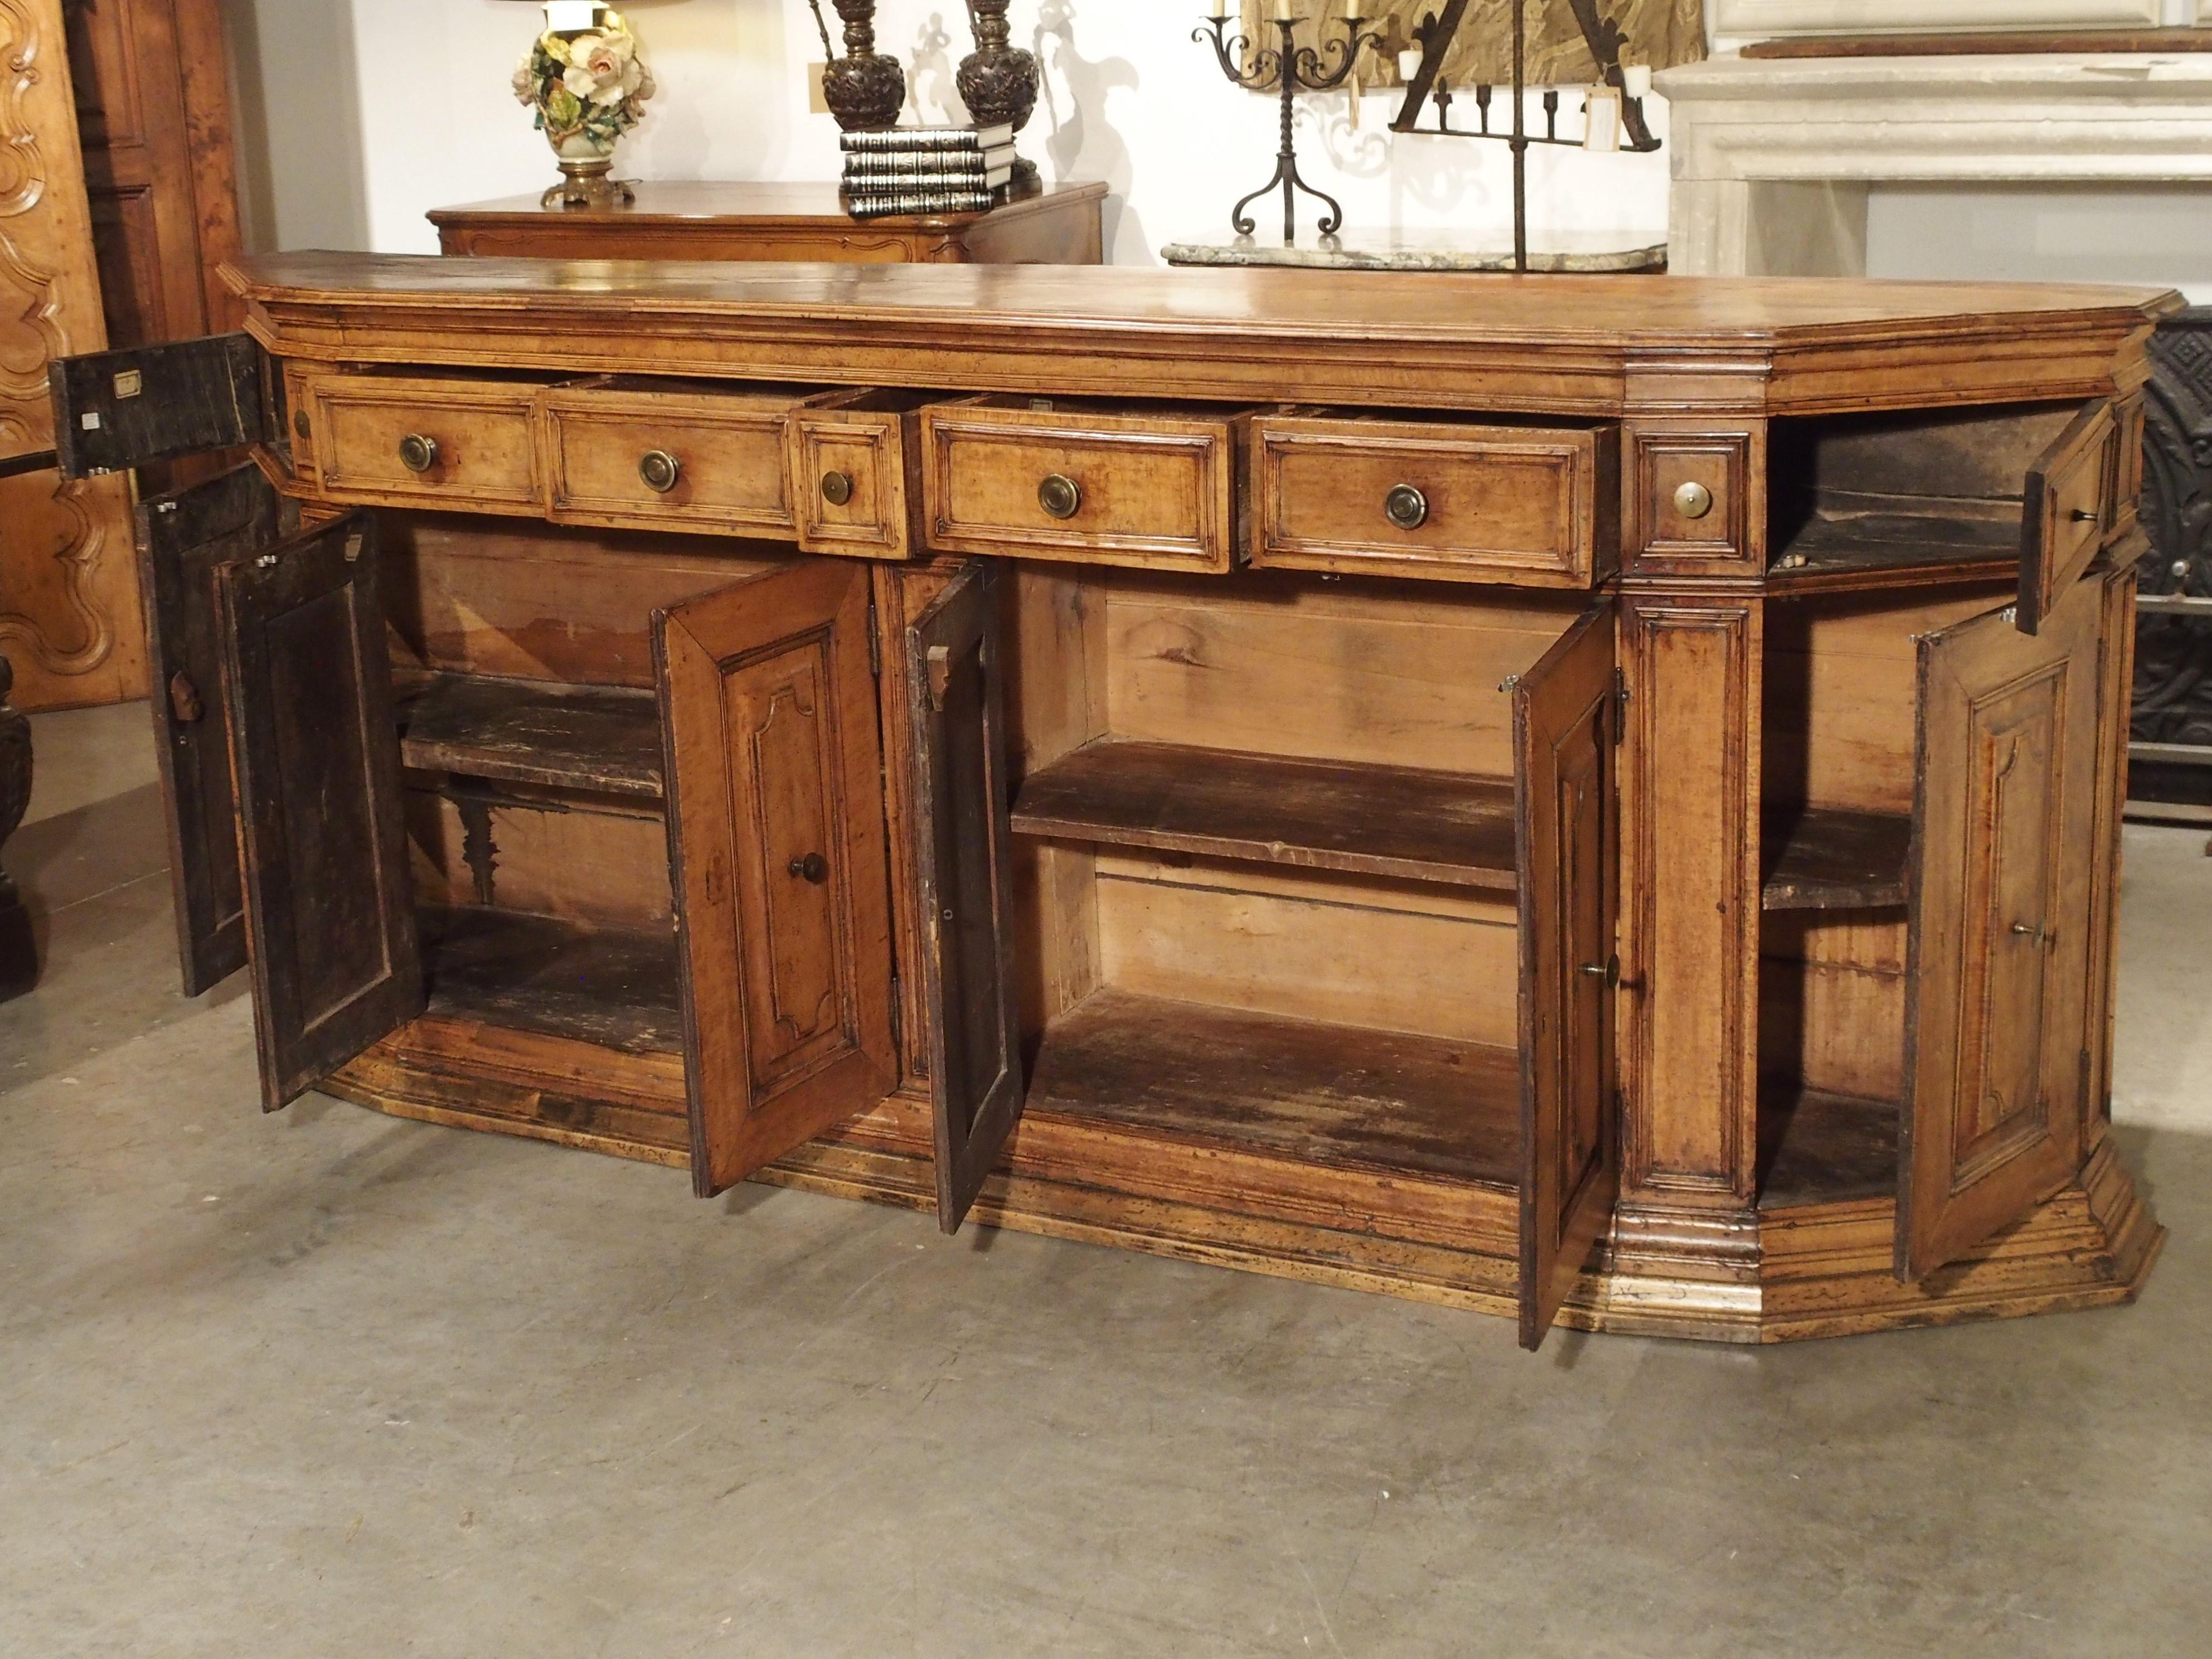 18th Century and Earlier Large Antique Walnut Wood Credenza from Tuscany Italy, 17th Century